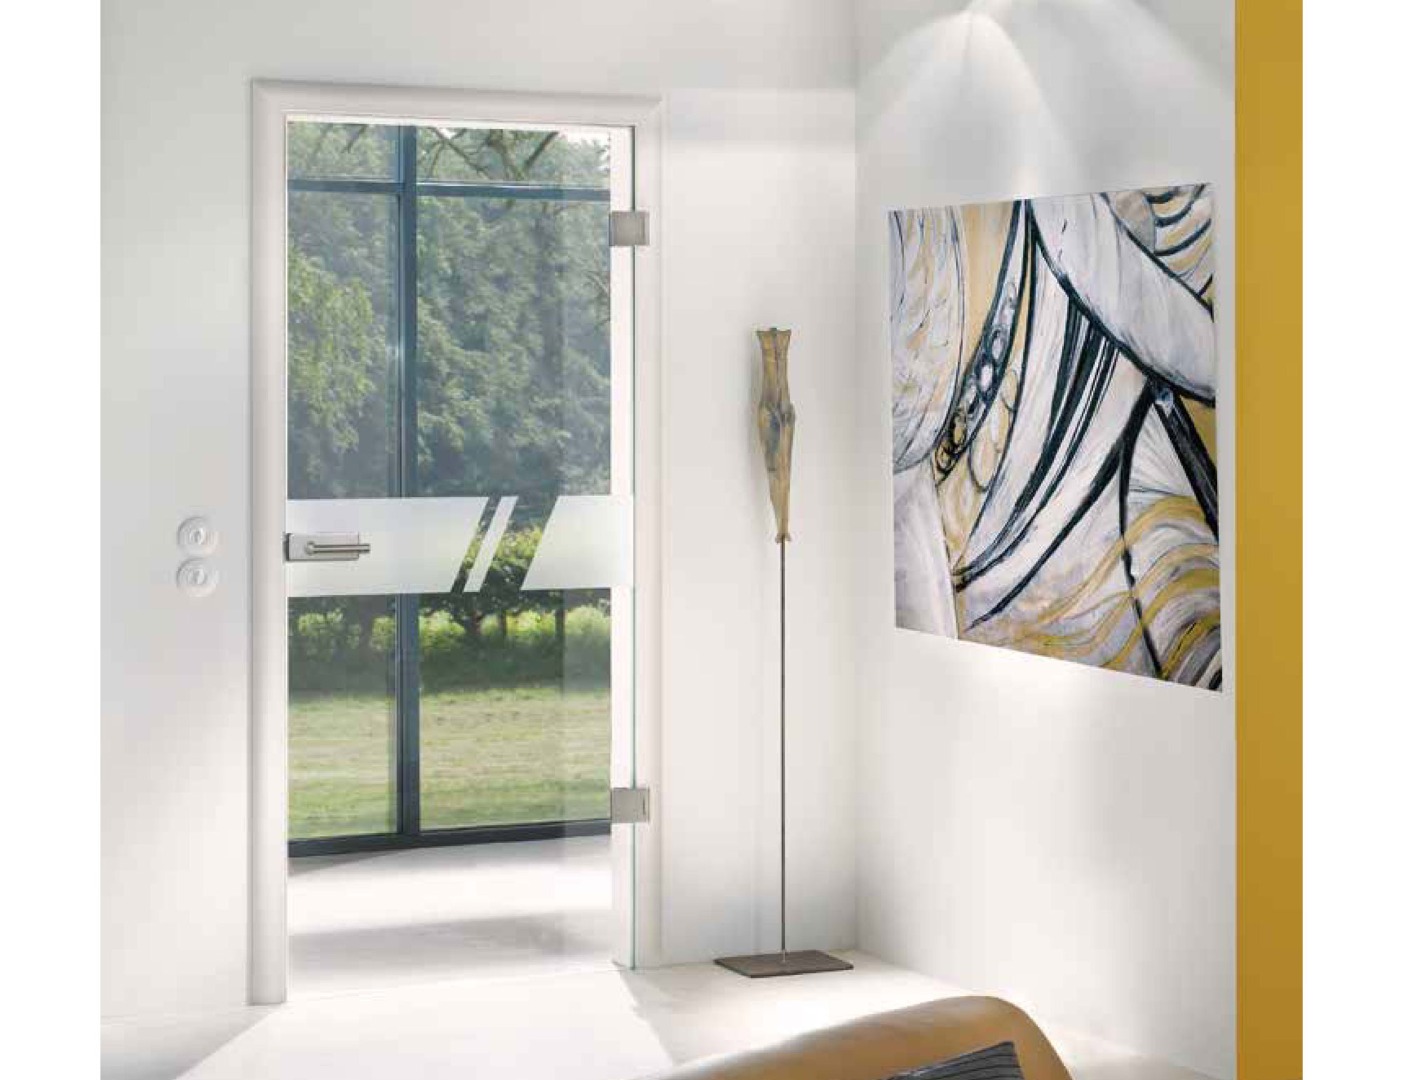 Introduction about Acid Etched Design Glass Door